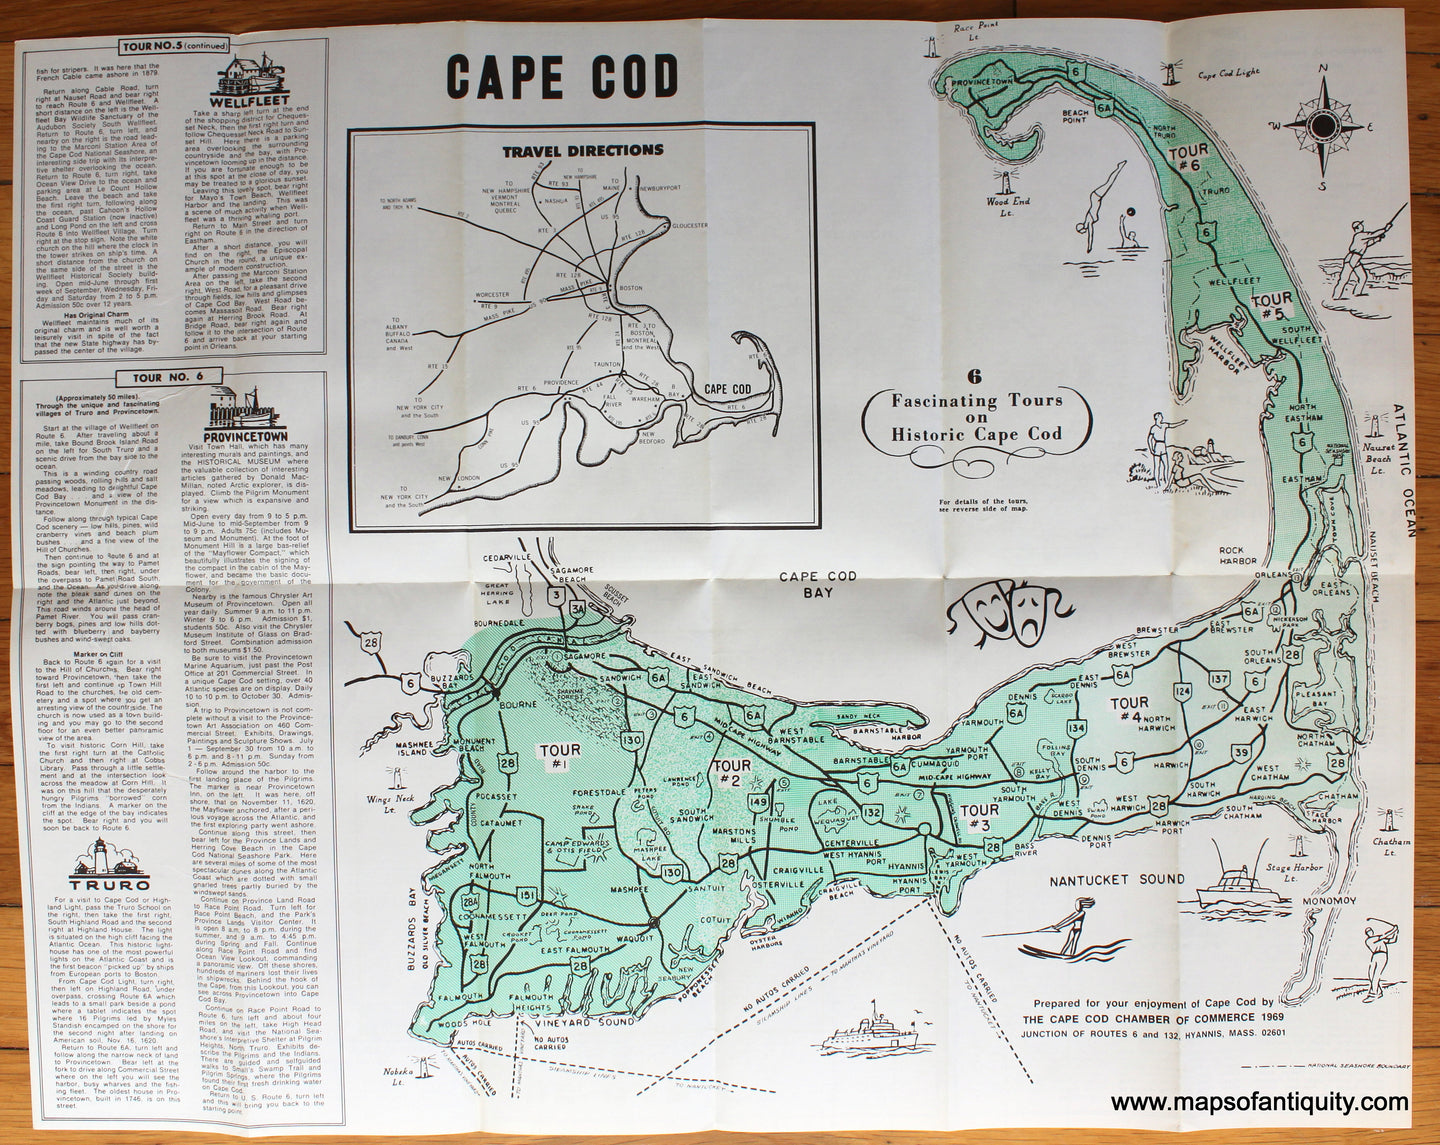 Antique-Printed-Color-Pictorial-Map-6-Fascinating-Tours-on-Cape-Cod-1969-Cape-Cod-Chamber-of-Commerce-Cape-Cod-1800s-19th-century-Maps-of-Antiquity